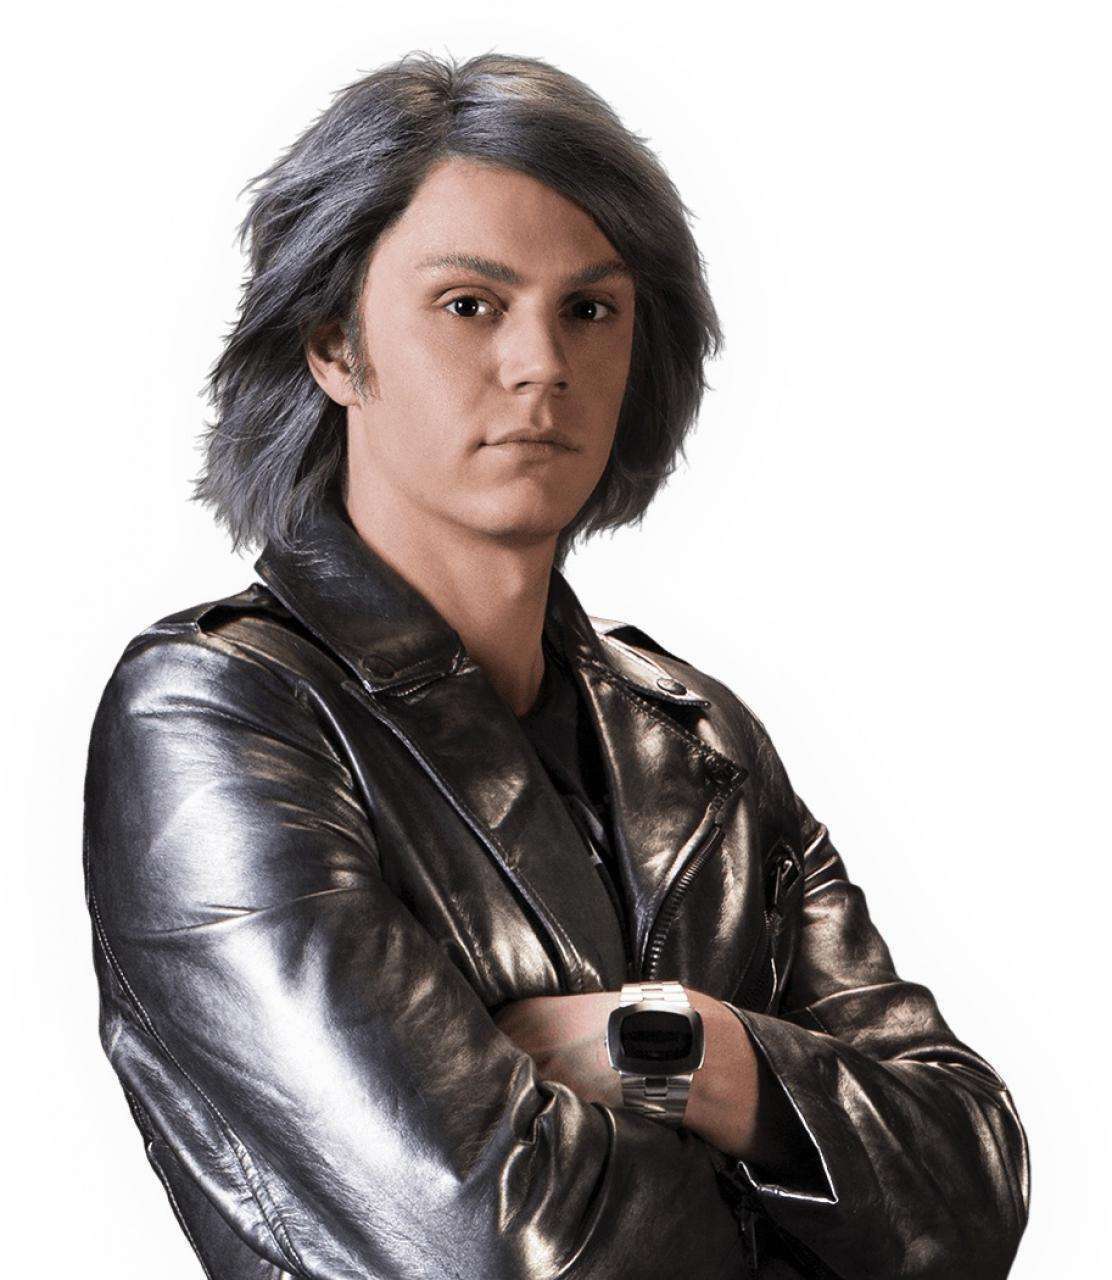 X Men Days of Future Past Peters